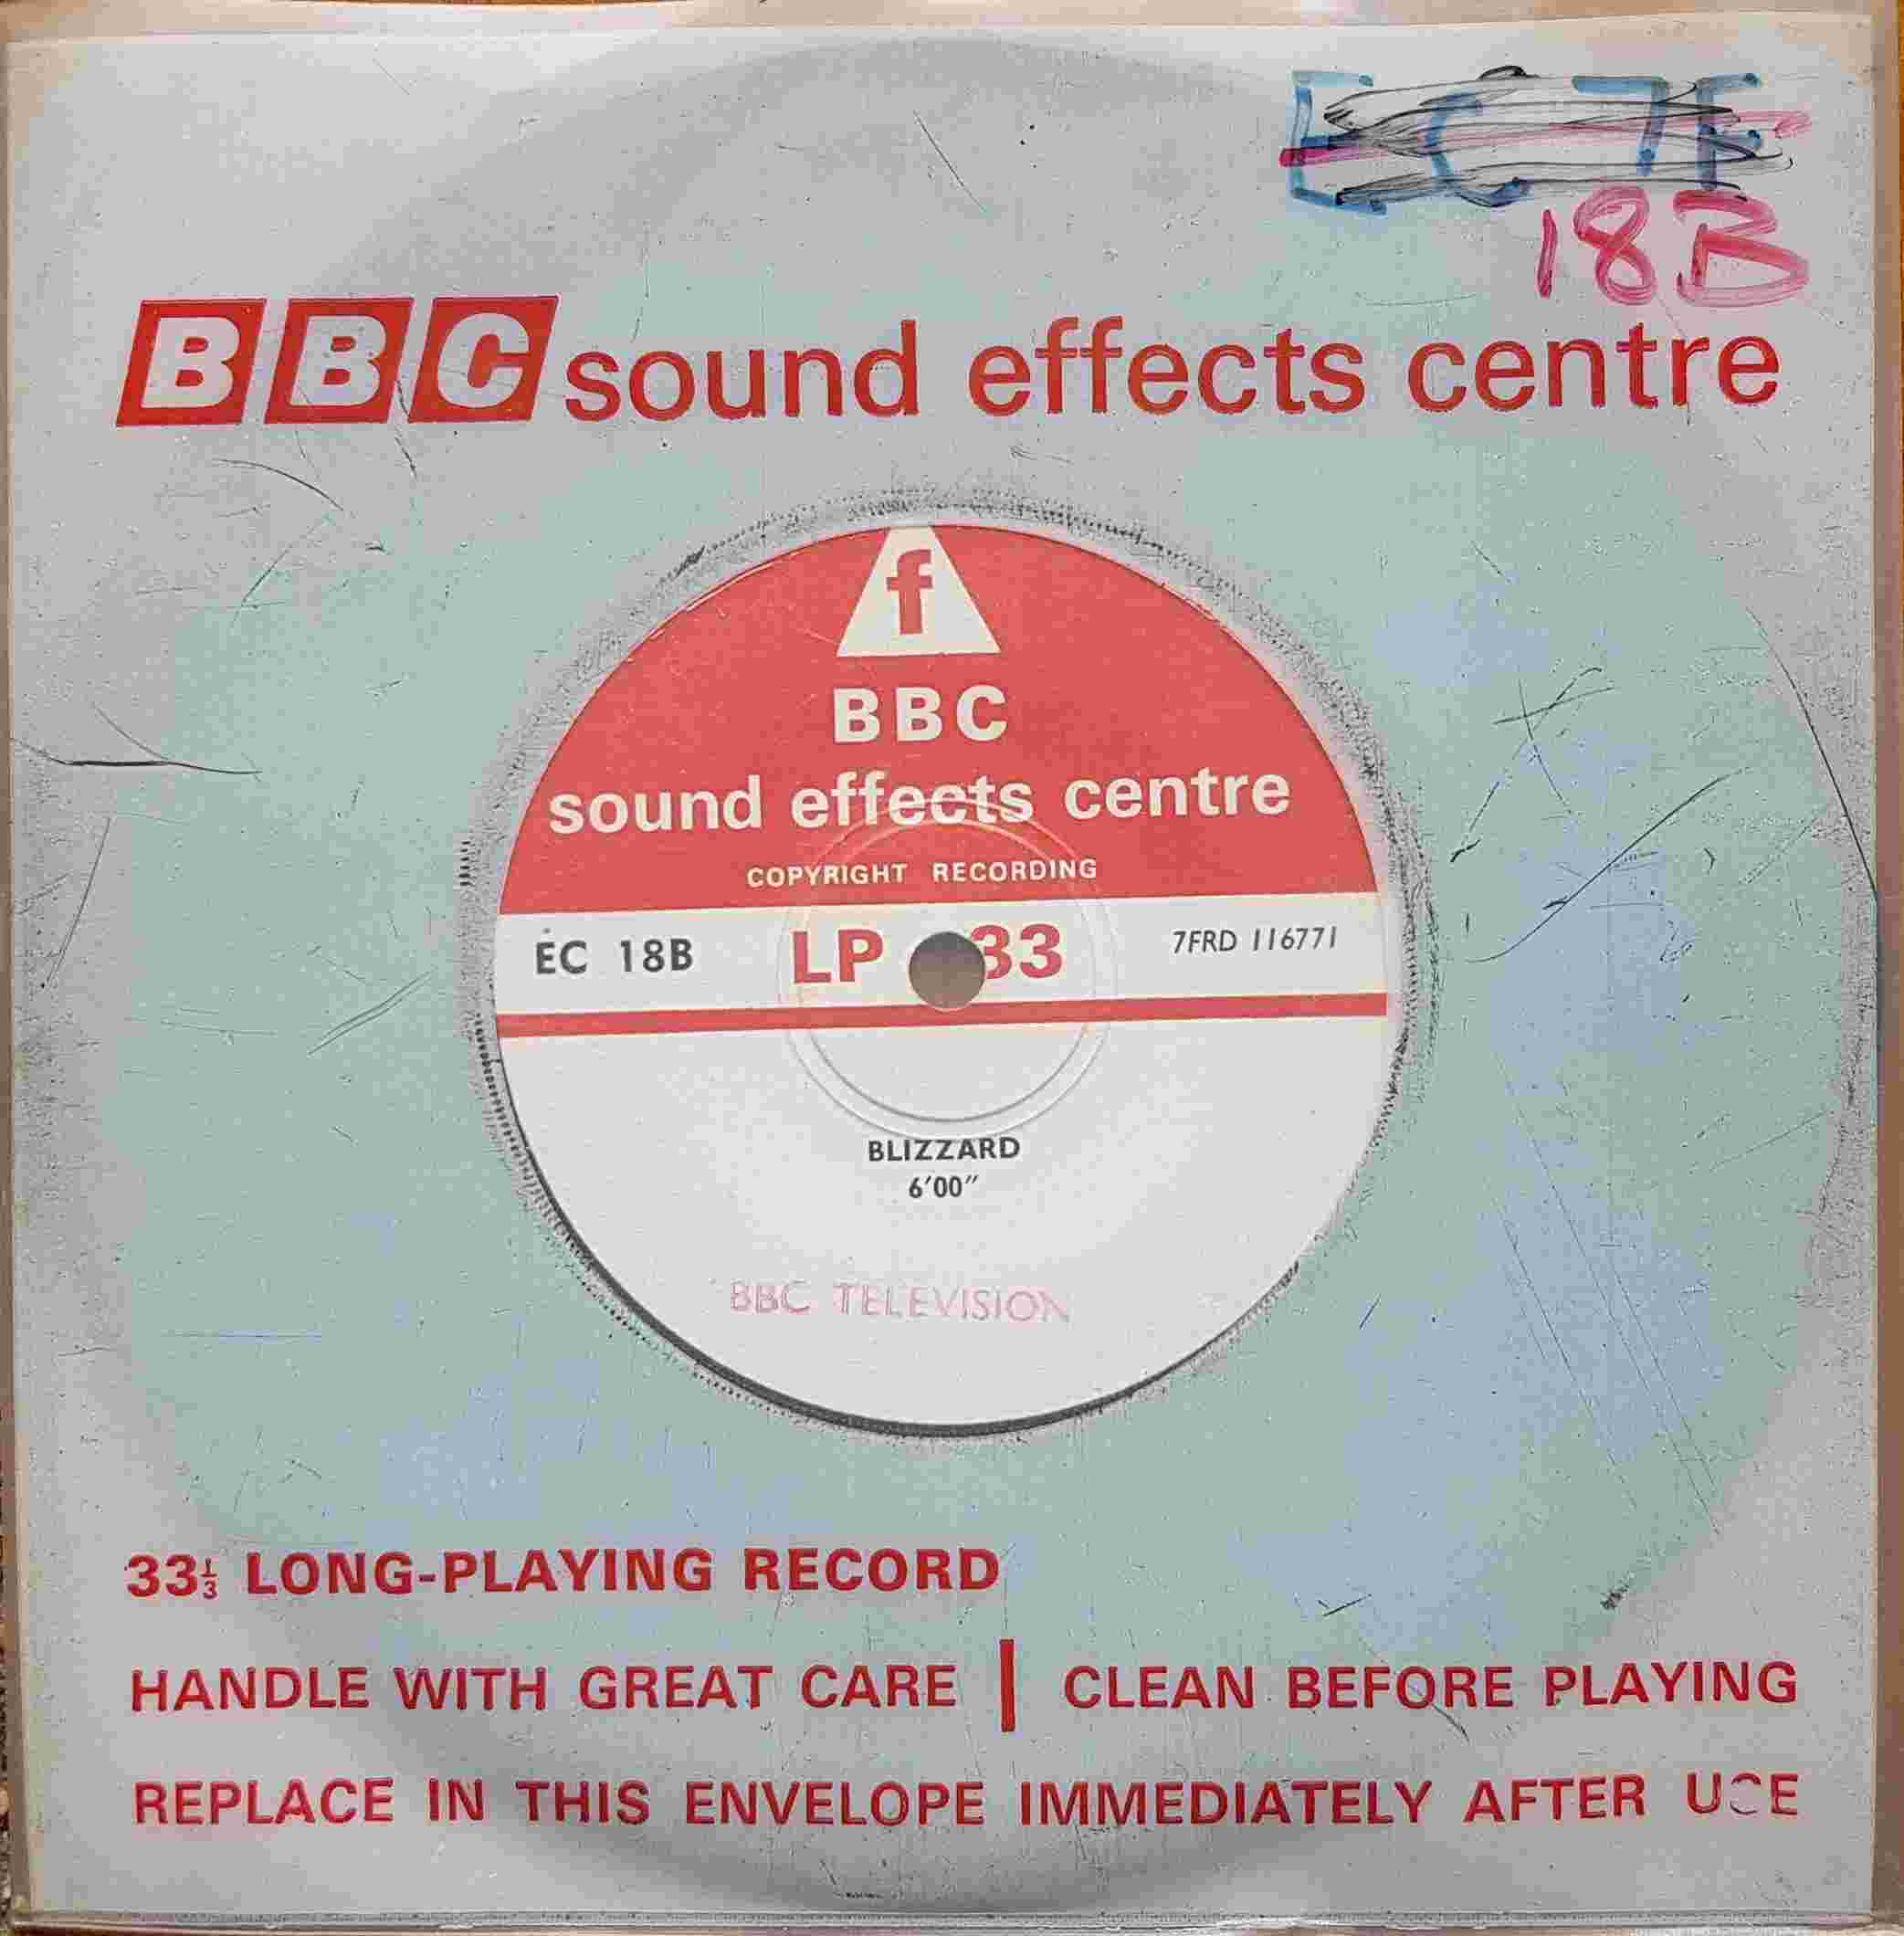 Picture of EC 18B Blizzard / Strong, gusty wind by artist Not registered from the BBC singles - Records and Tapes library